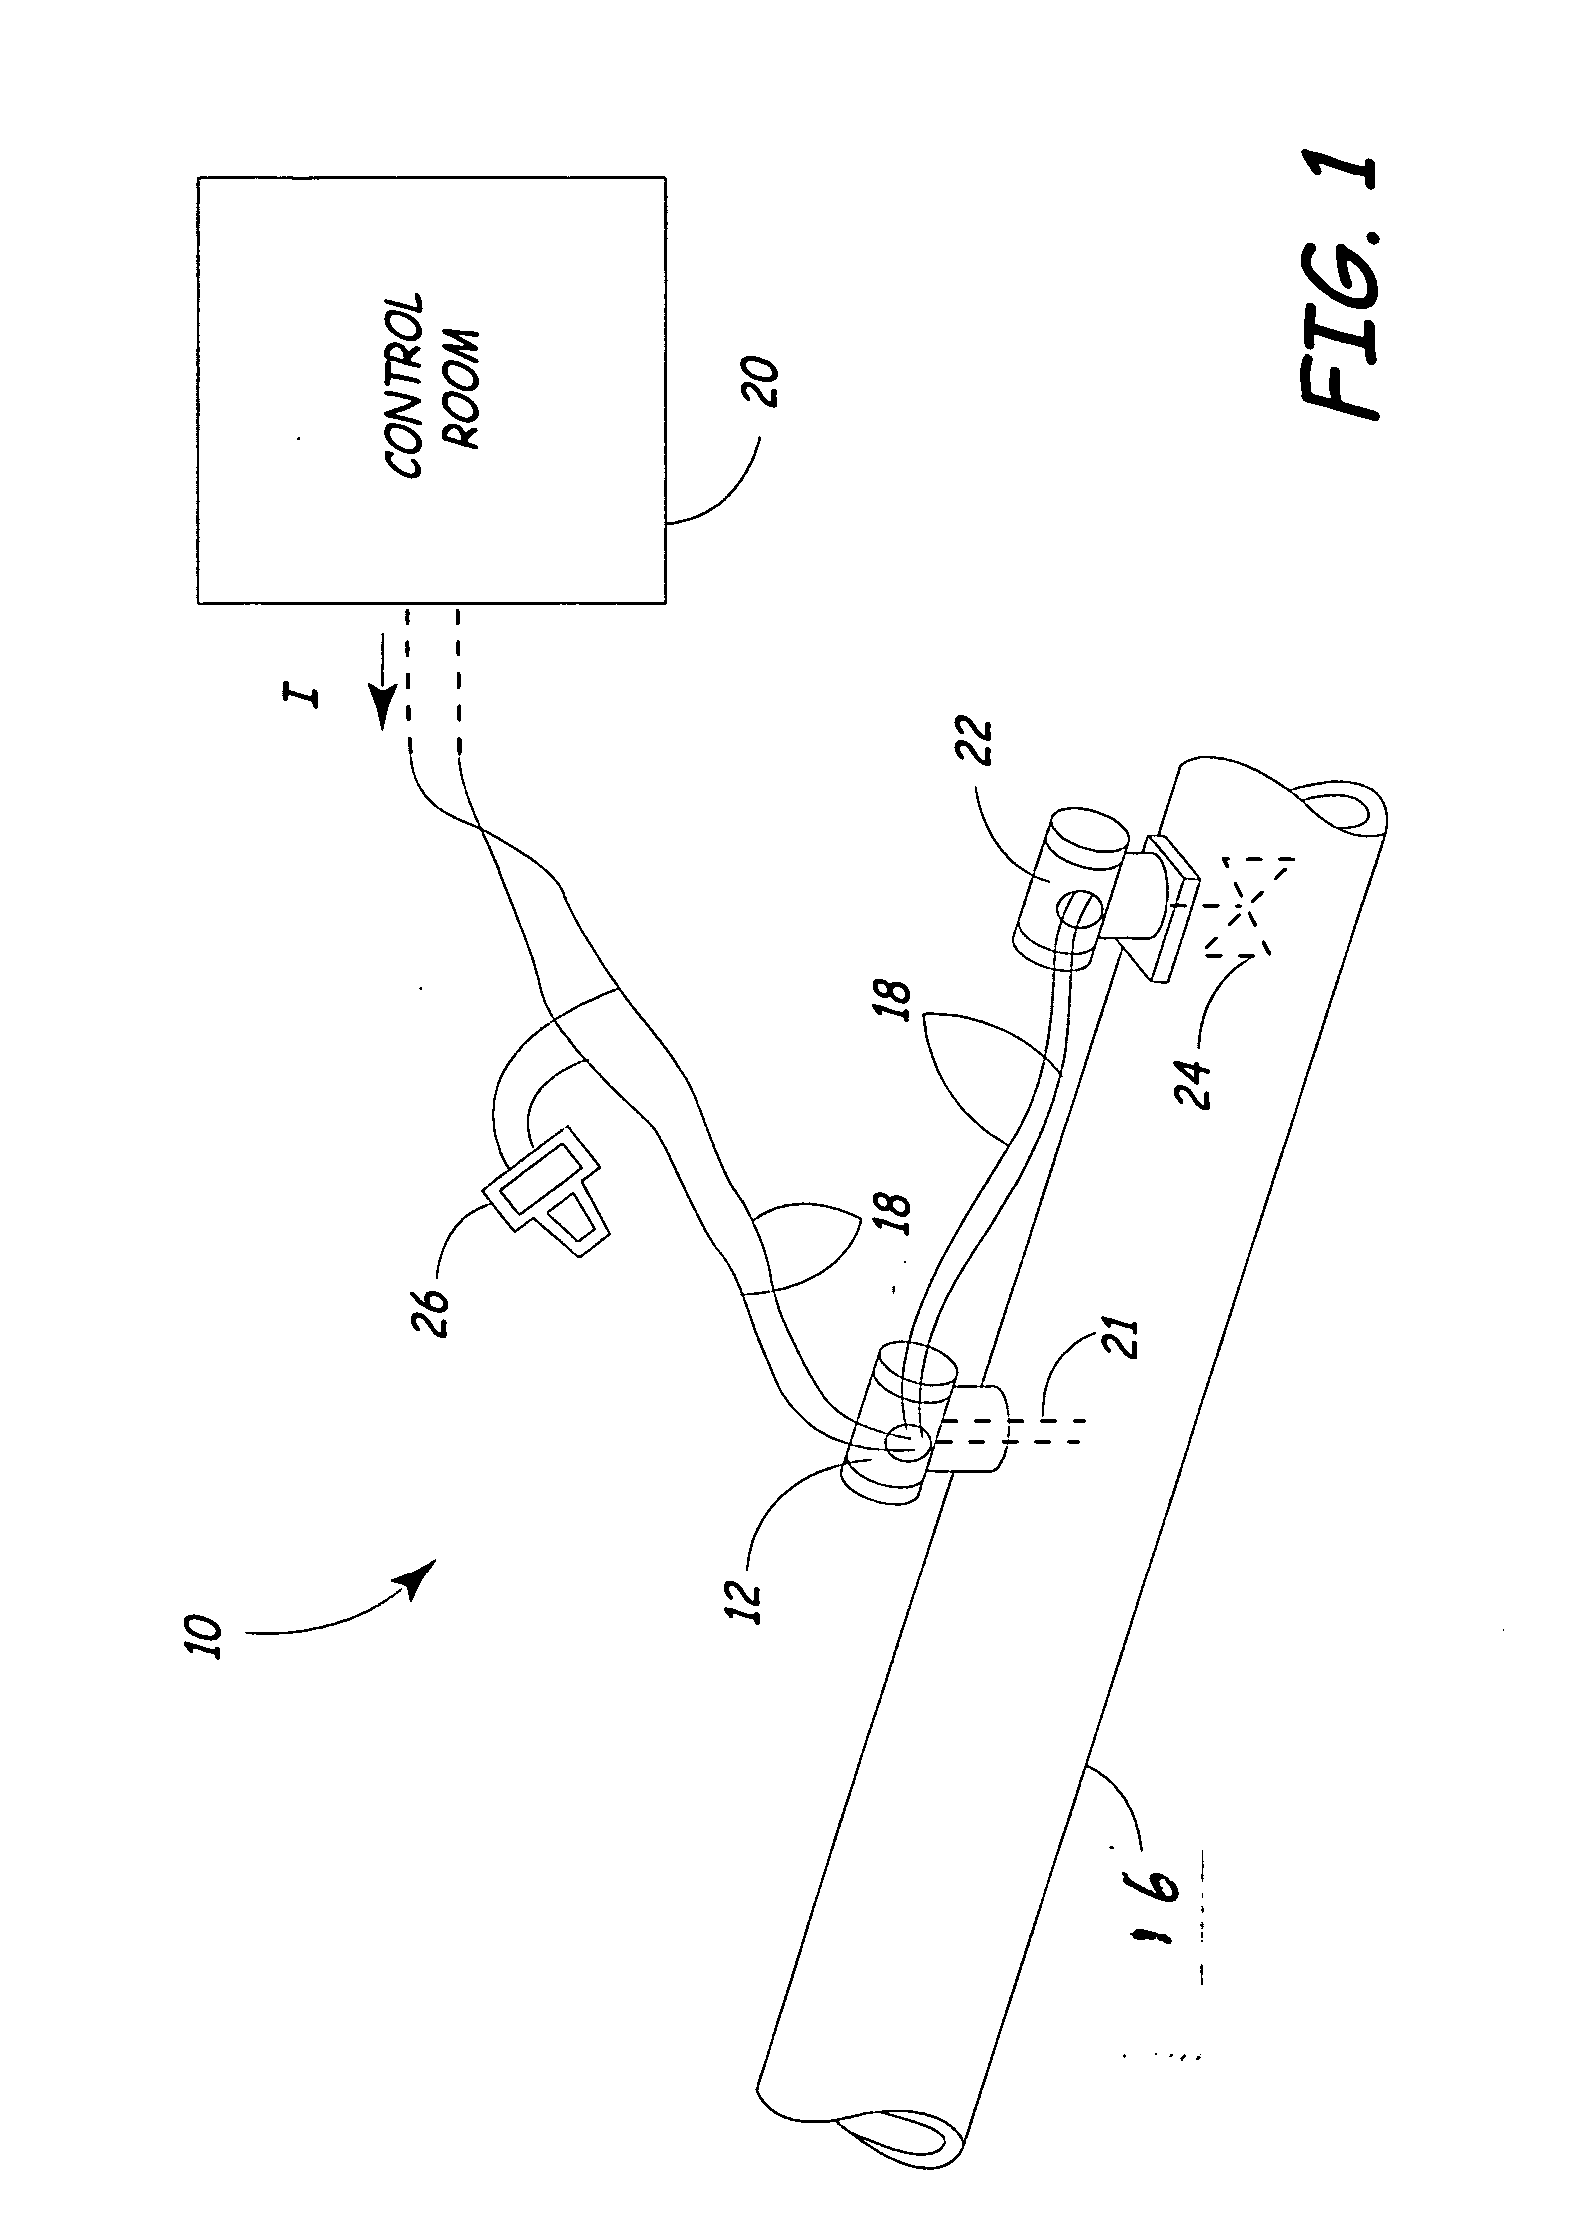 Process device with supervisory overlayer